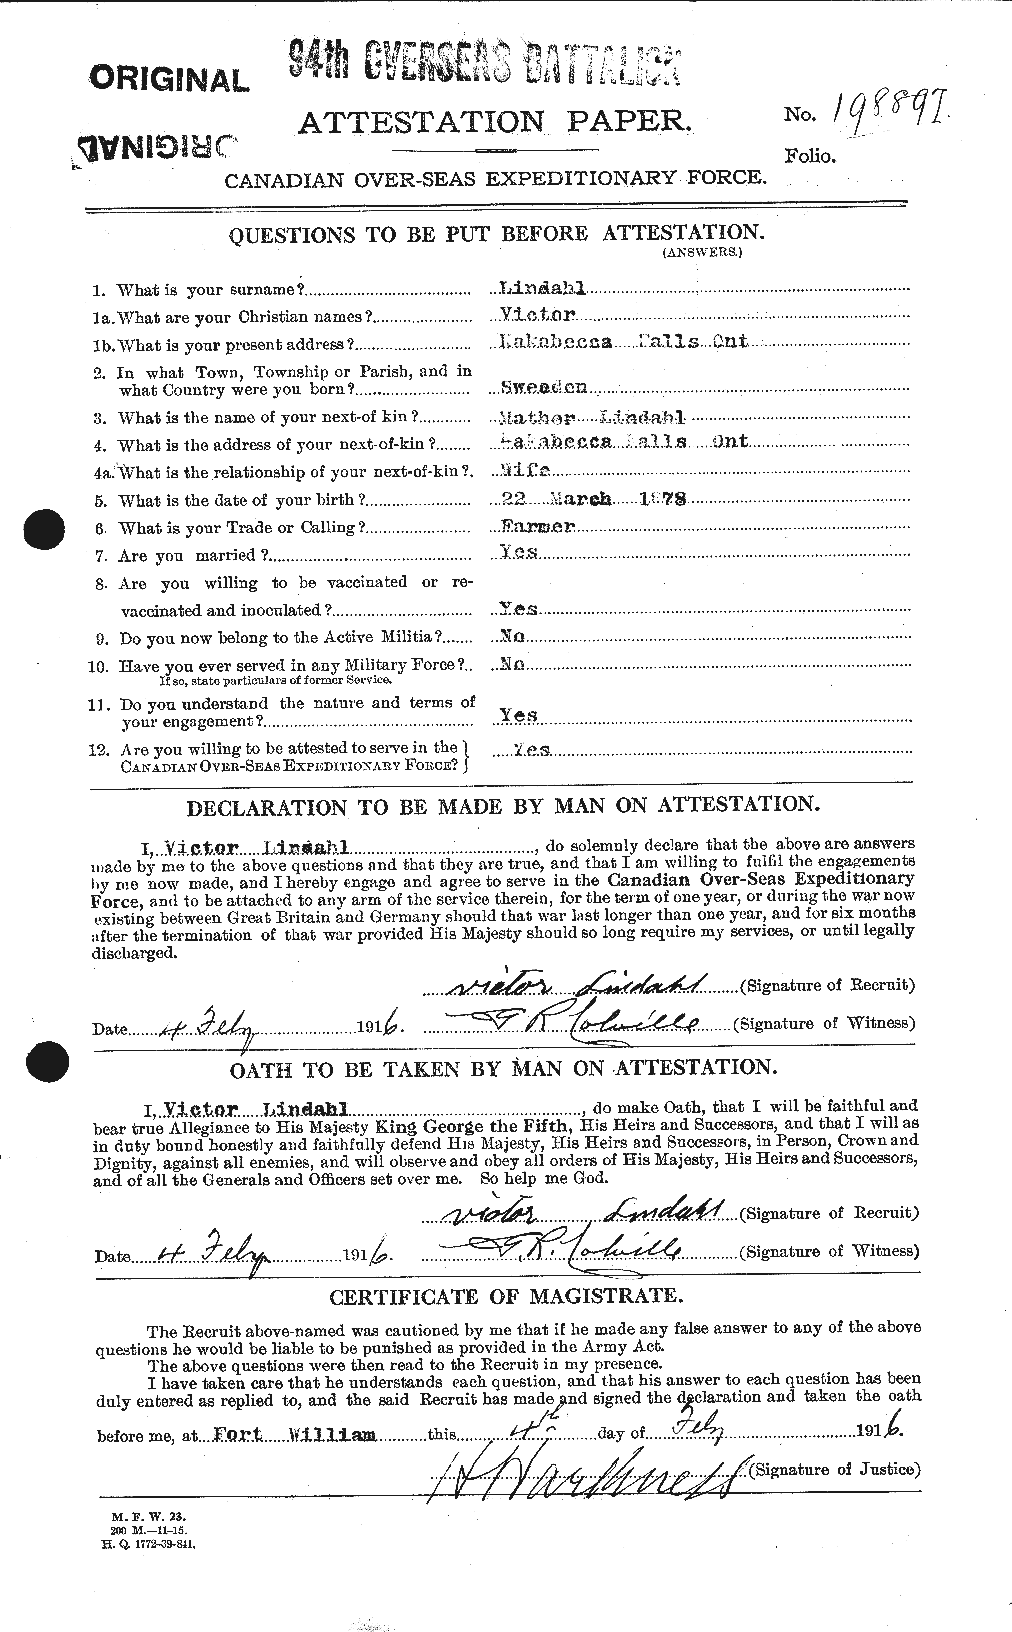 Personnel Records of the First World War - CEF 467638a